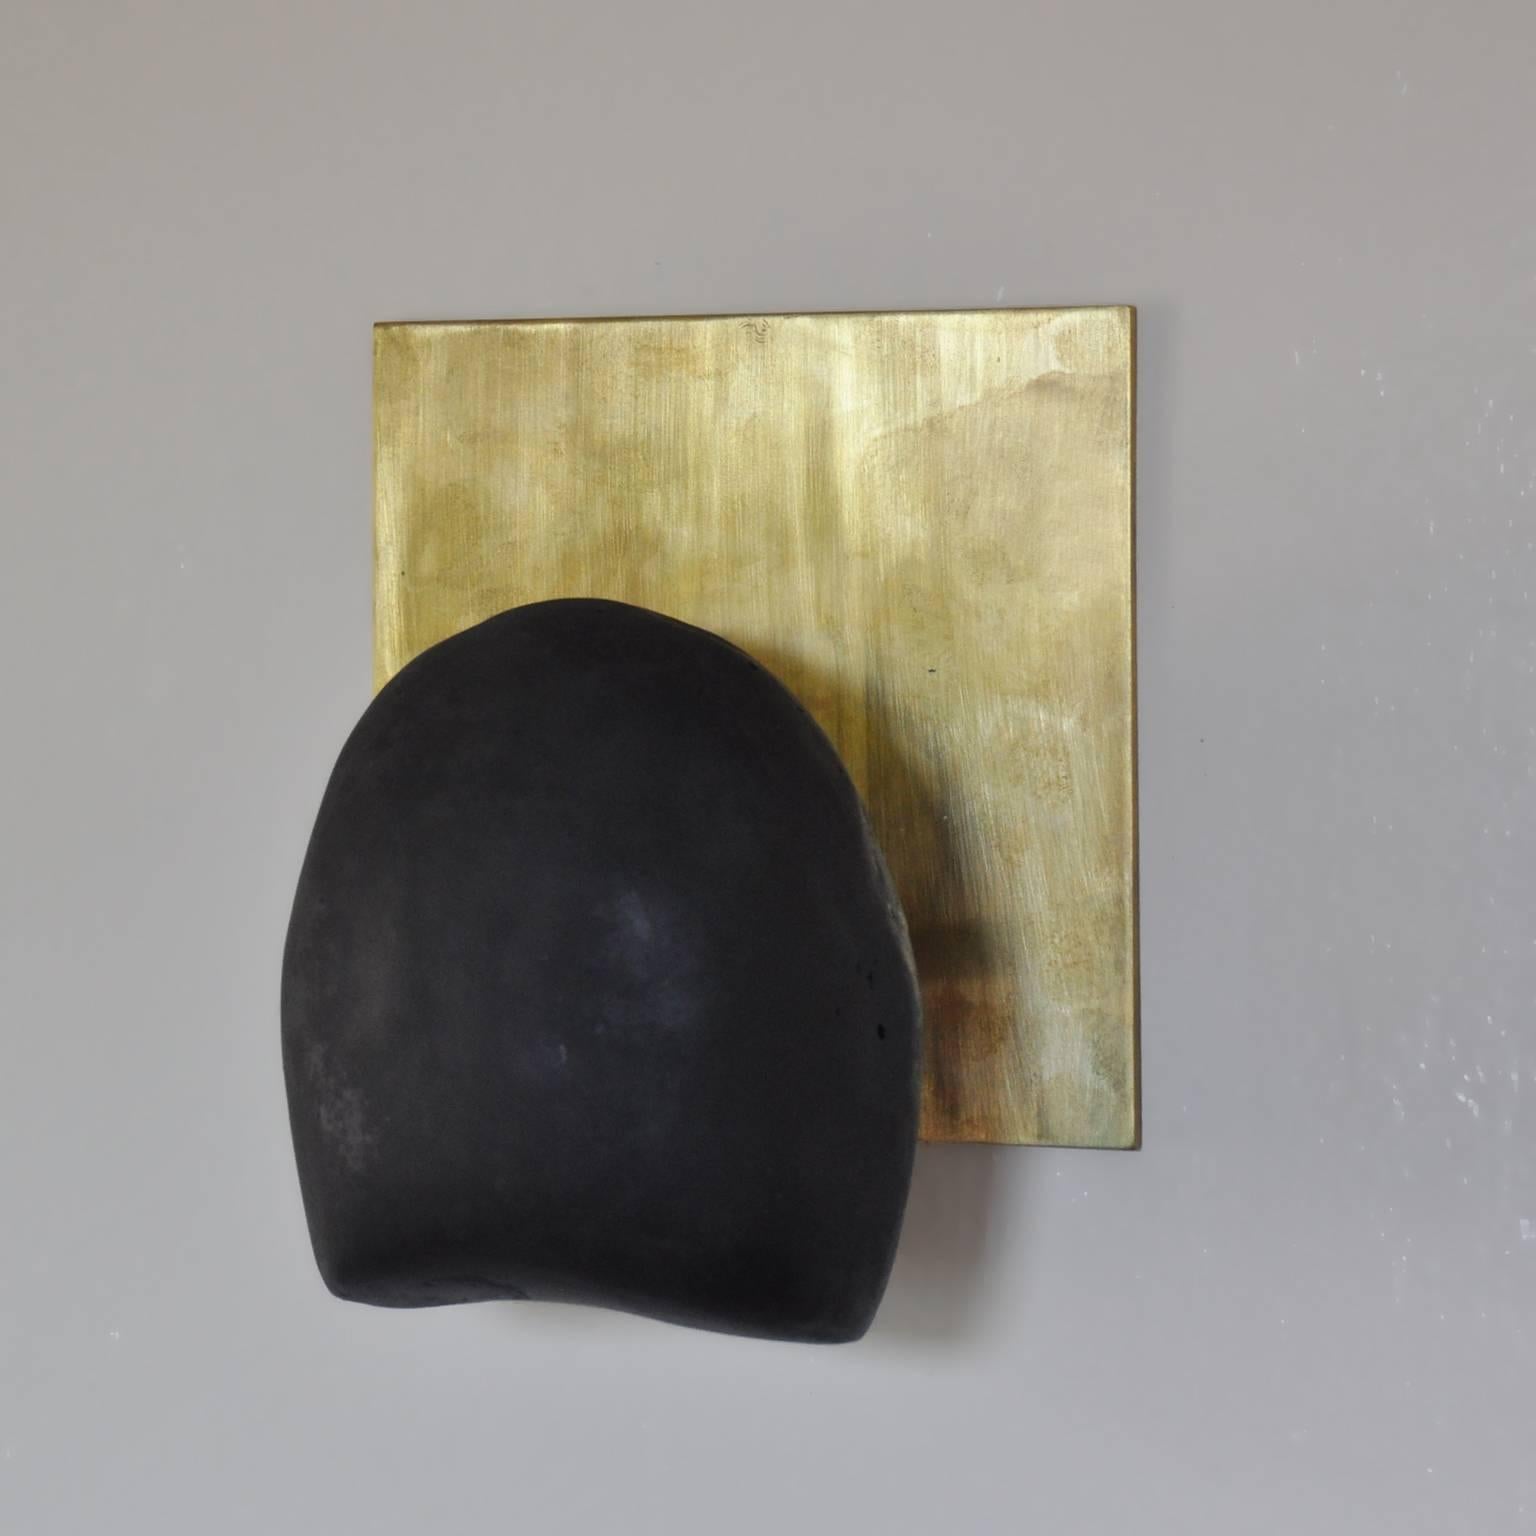 The Tallomet 01 Sconce is made of a hand-cast black concrete shell post-mounted onto a 1/8" patinated brass backplate. Available hard-wired or with cord and in-line rocker switch, this sconce ships with two LED bulbs and emits a soft glow.